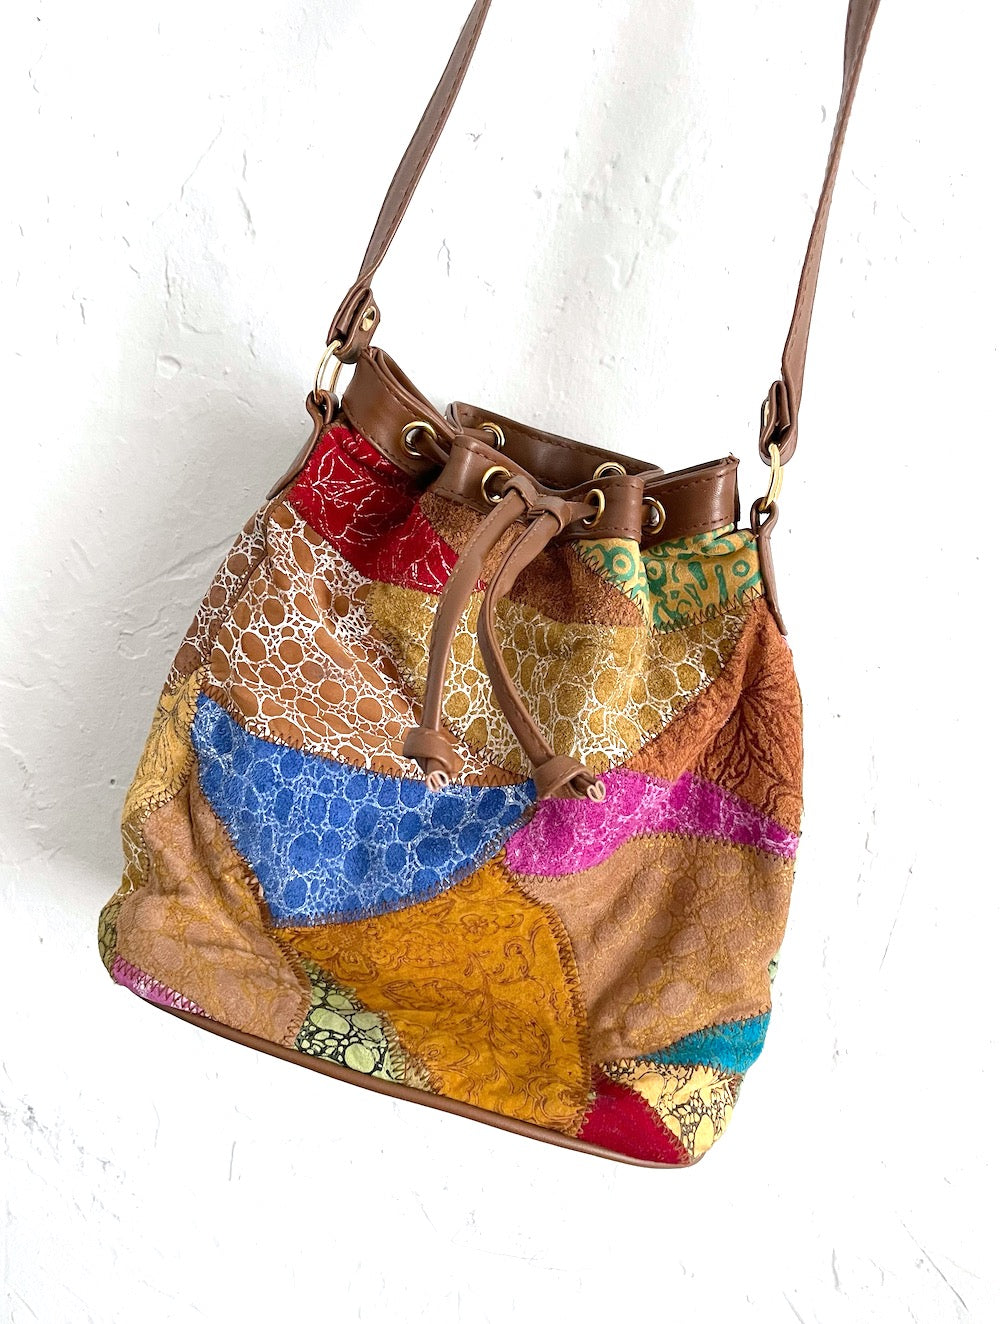 PATCHWORK Leather Bag 02 // unique and one of a kind leather tote | Patchwork  leather, Leather bag women, Bags